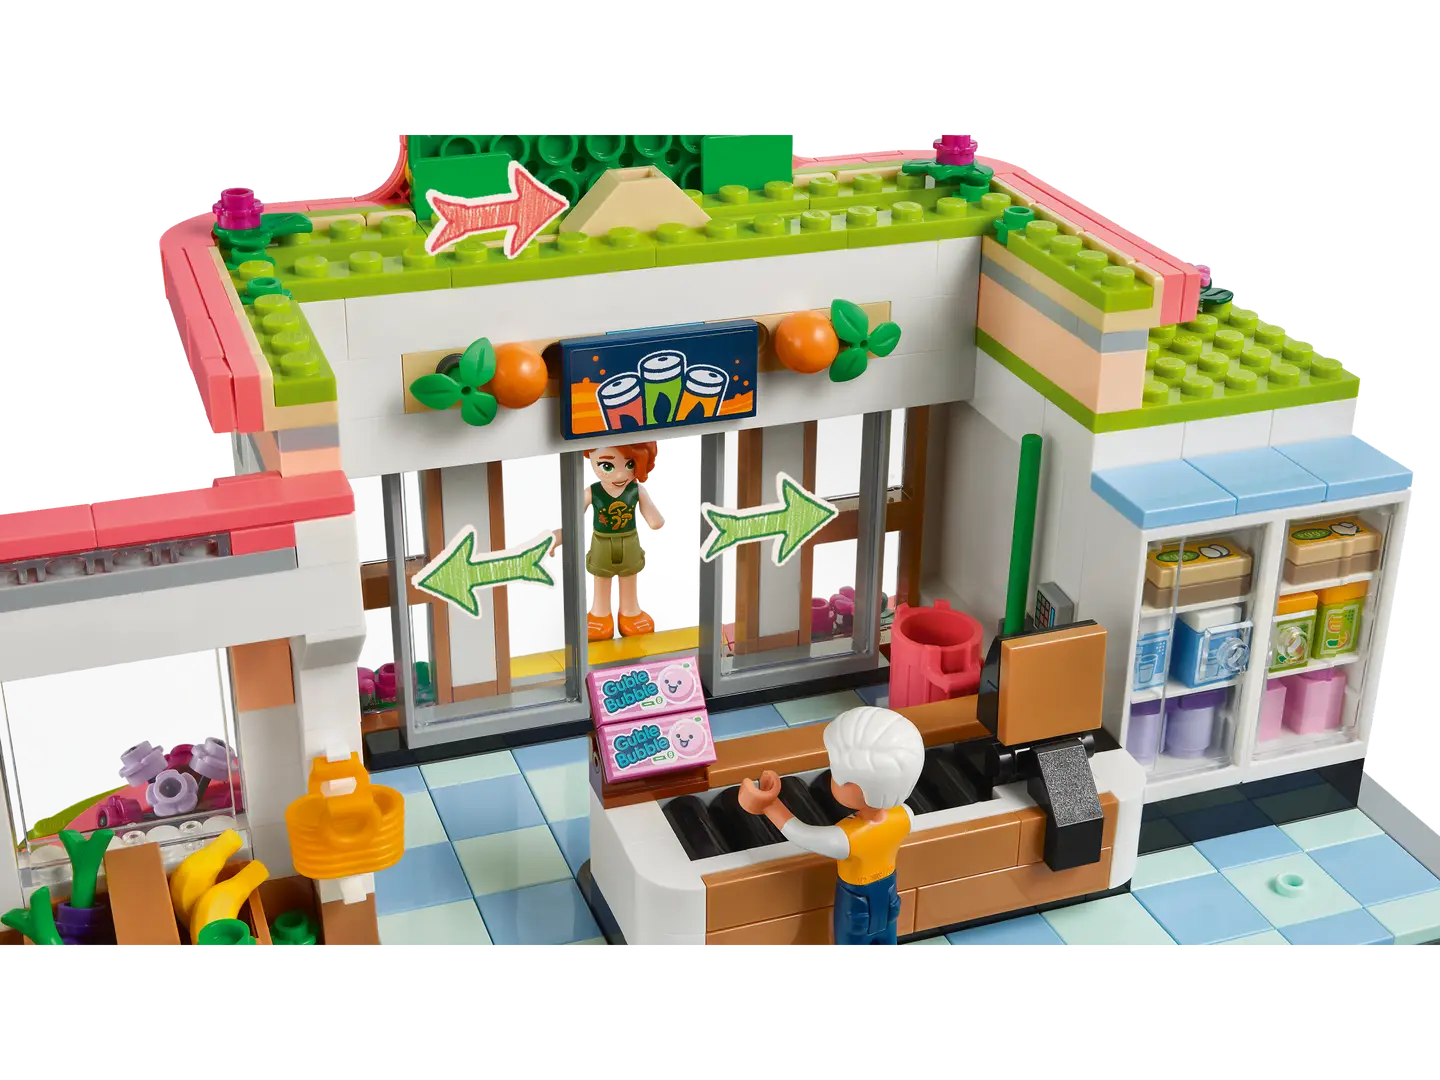 Lego Friends - Organic Grocery Store